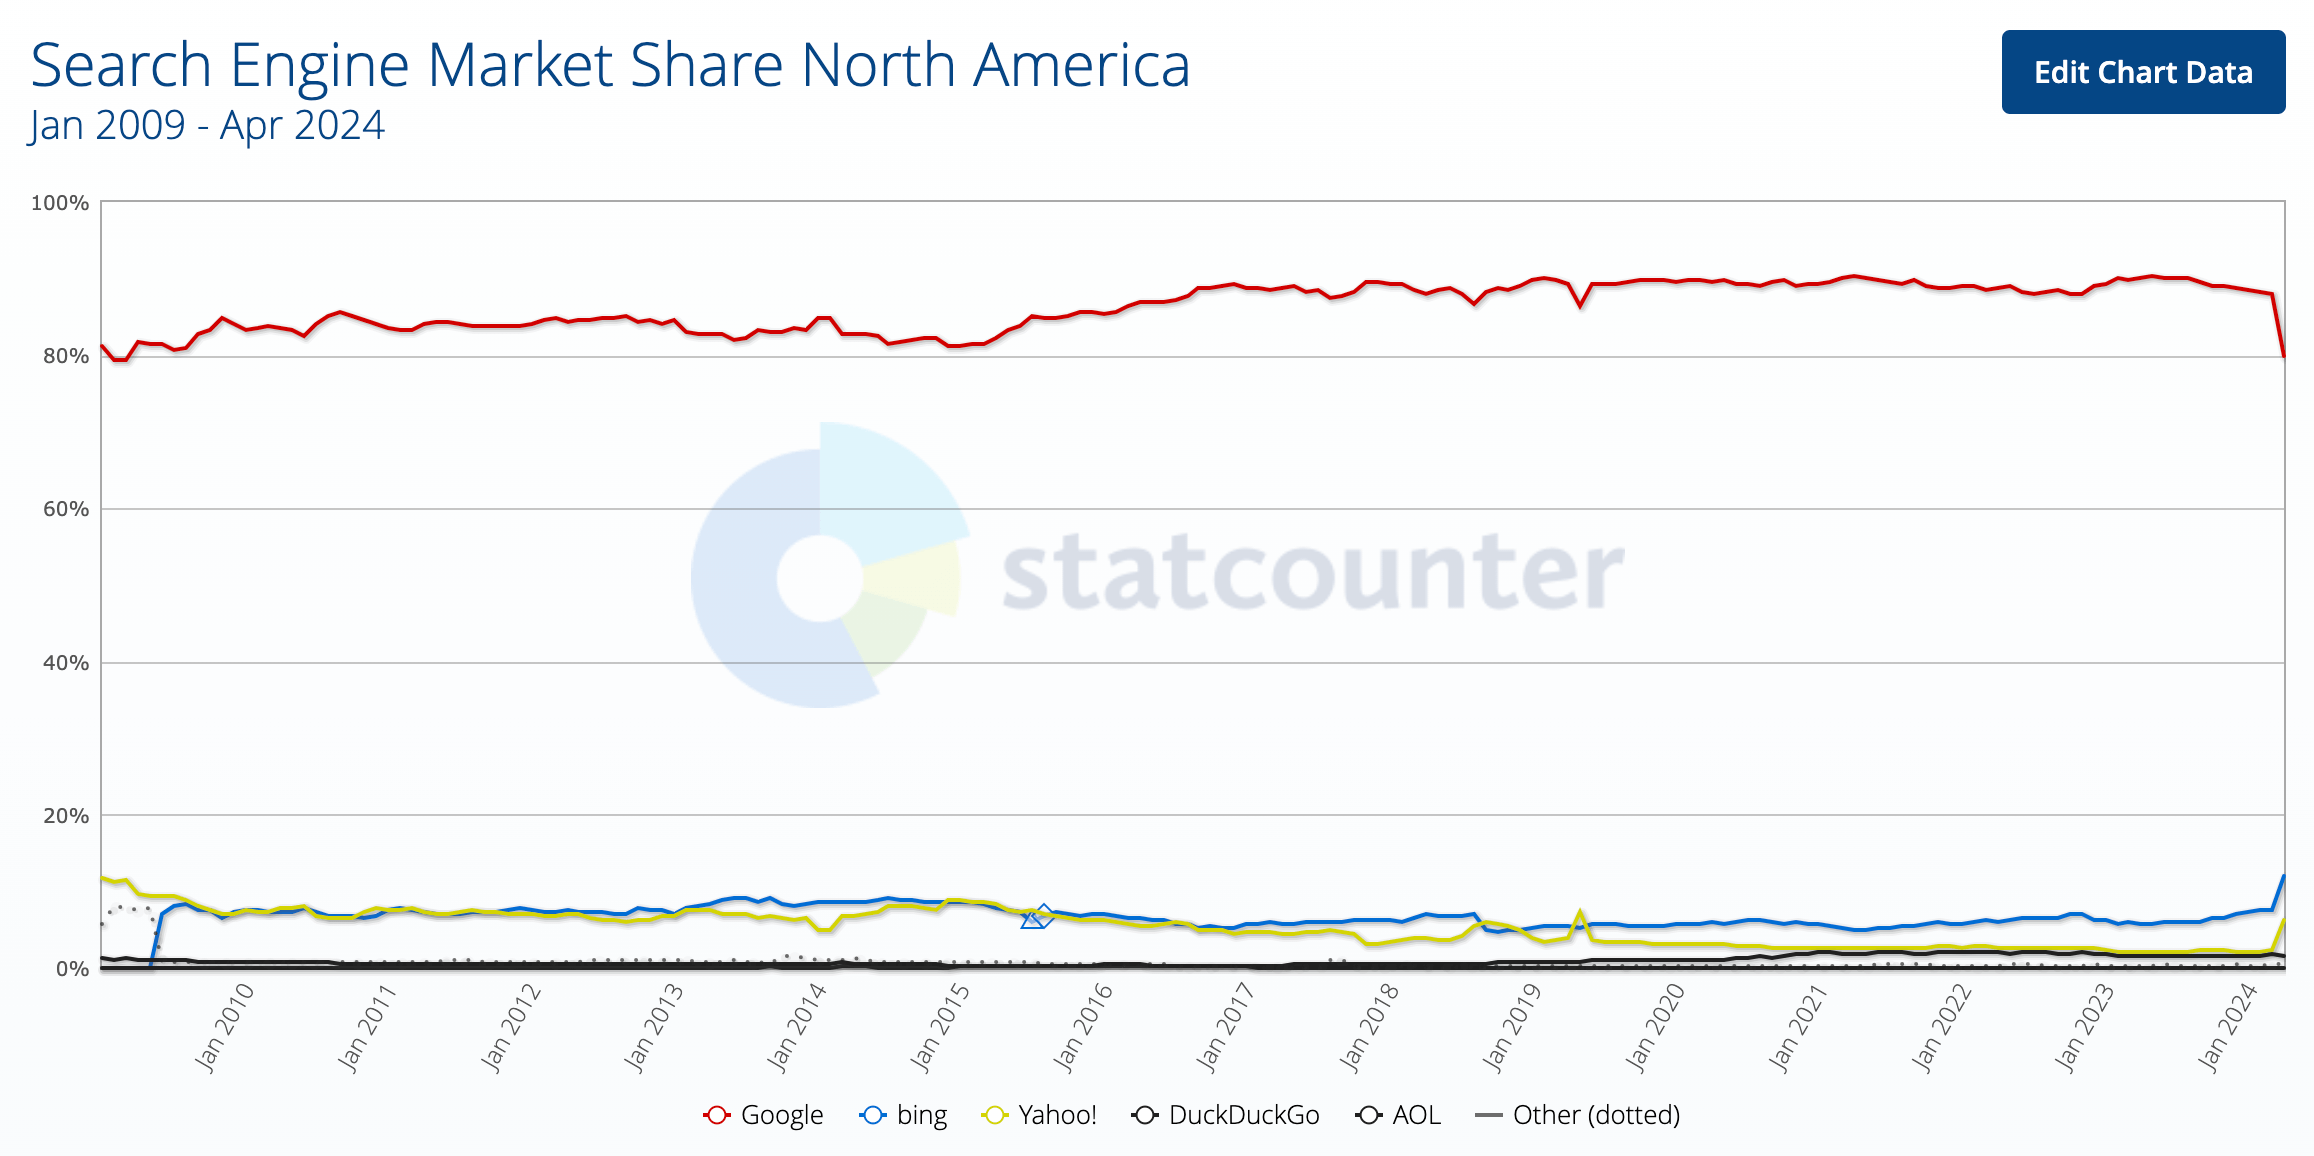 North The united states search engine market share 2009 - 2024 (Statcounter)